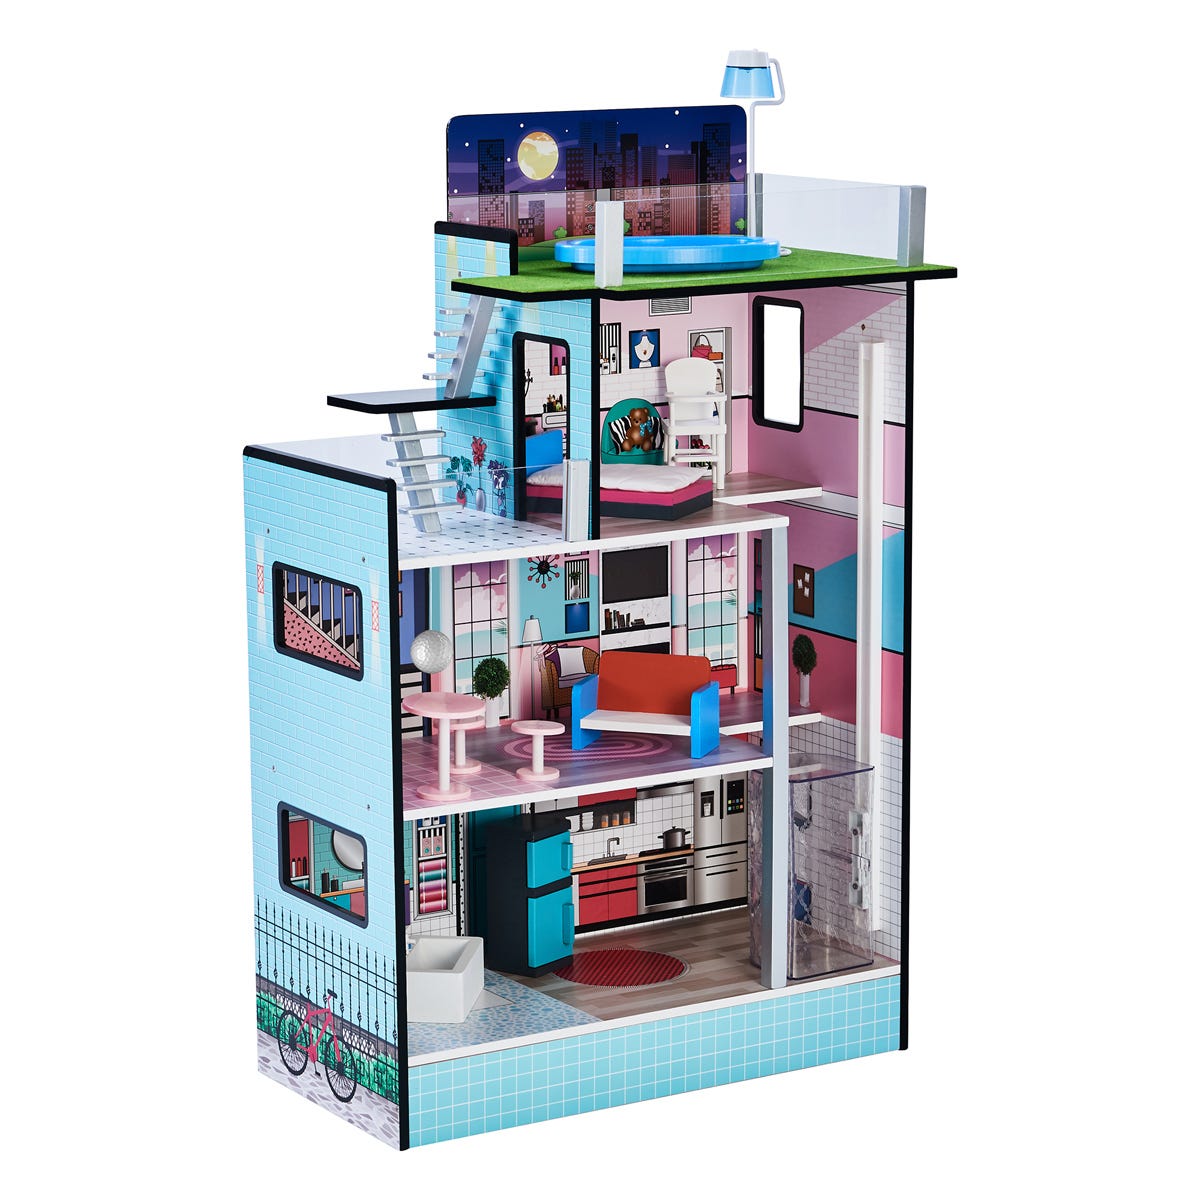 Teamson Kids Dreamland Barcelona Dollhouse With 10 Accessories Turquoise/Black